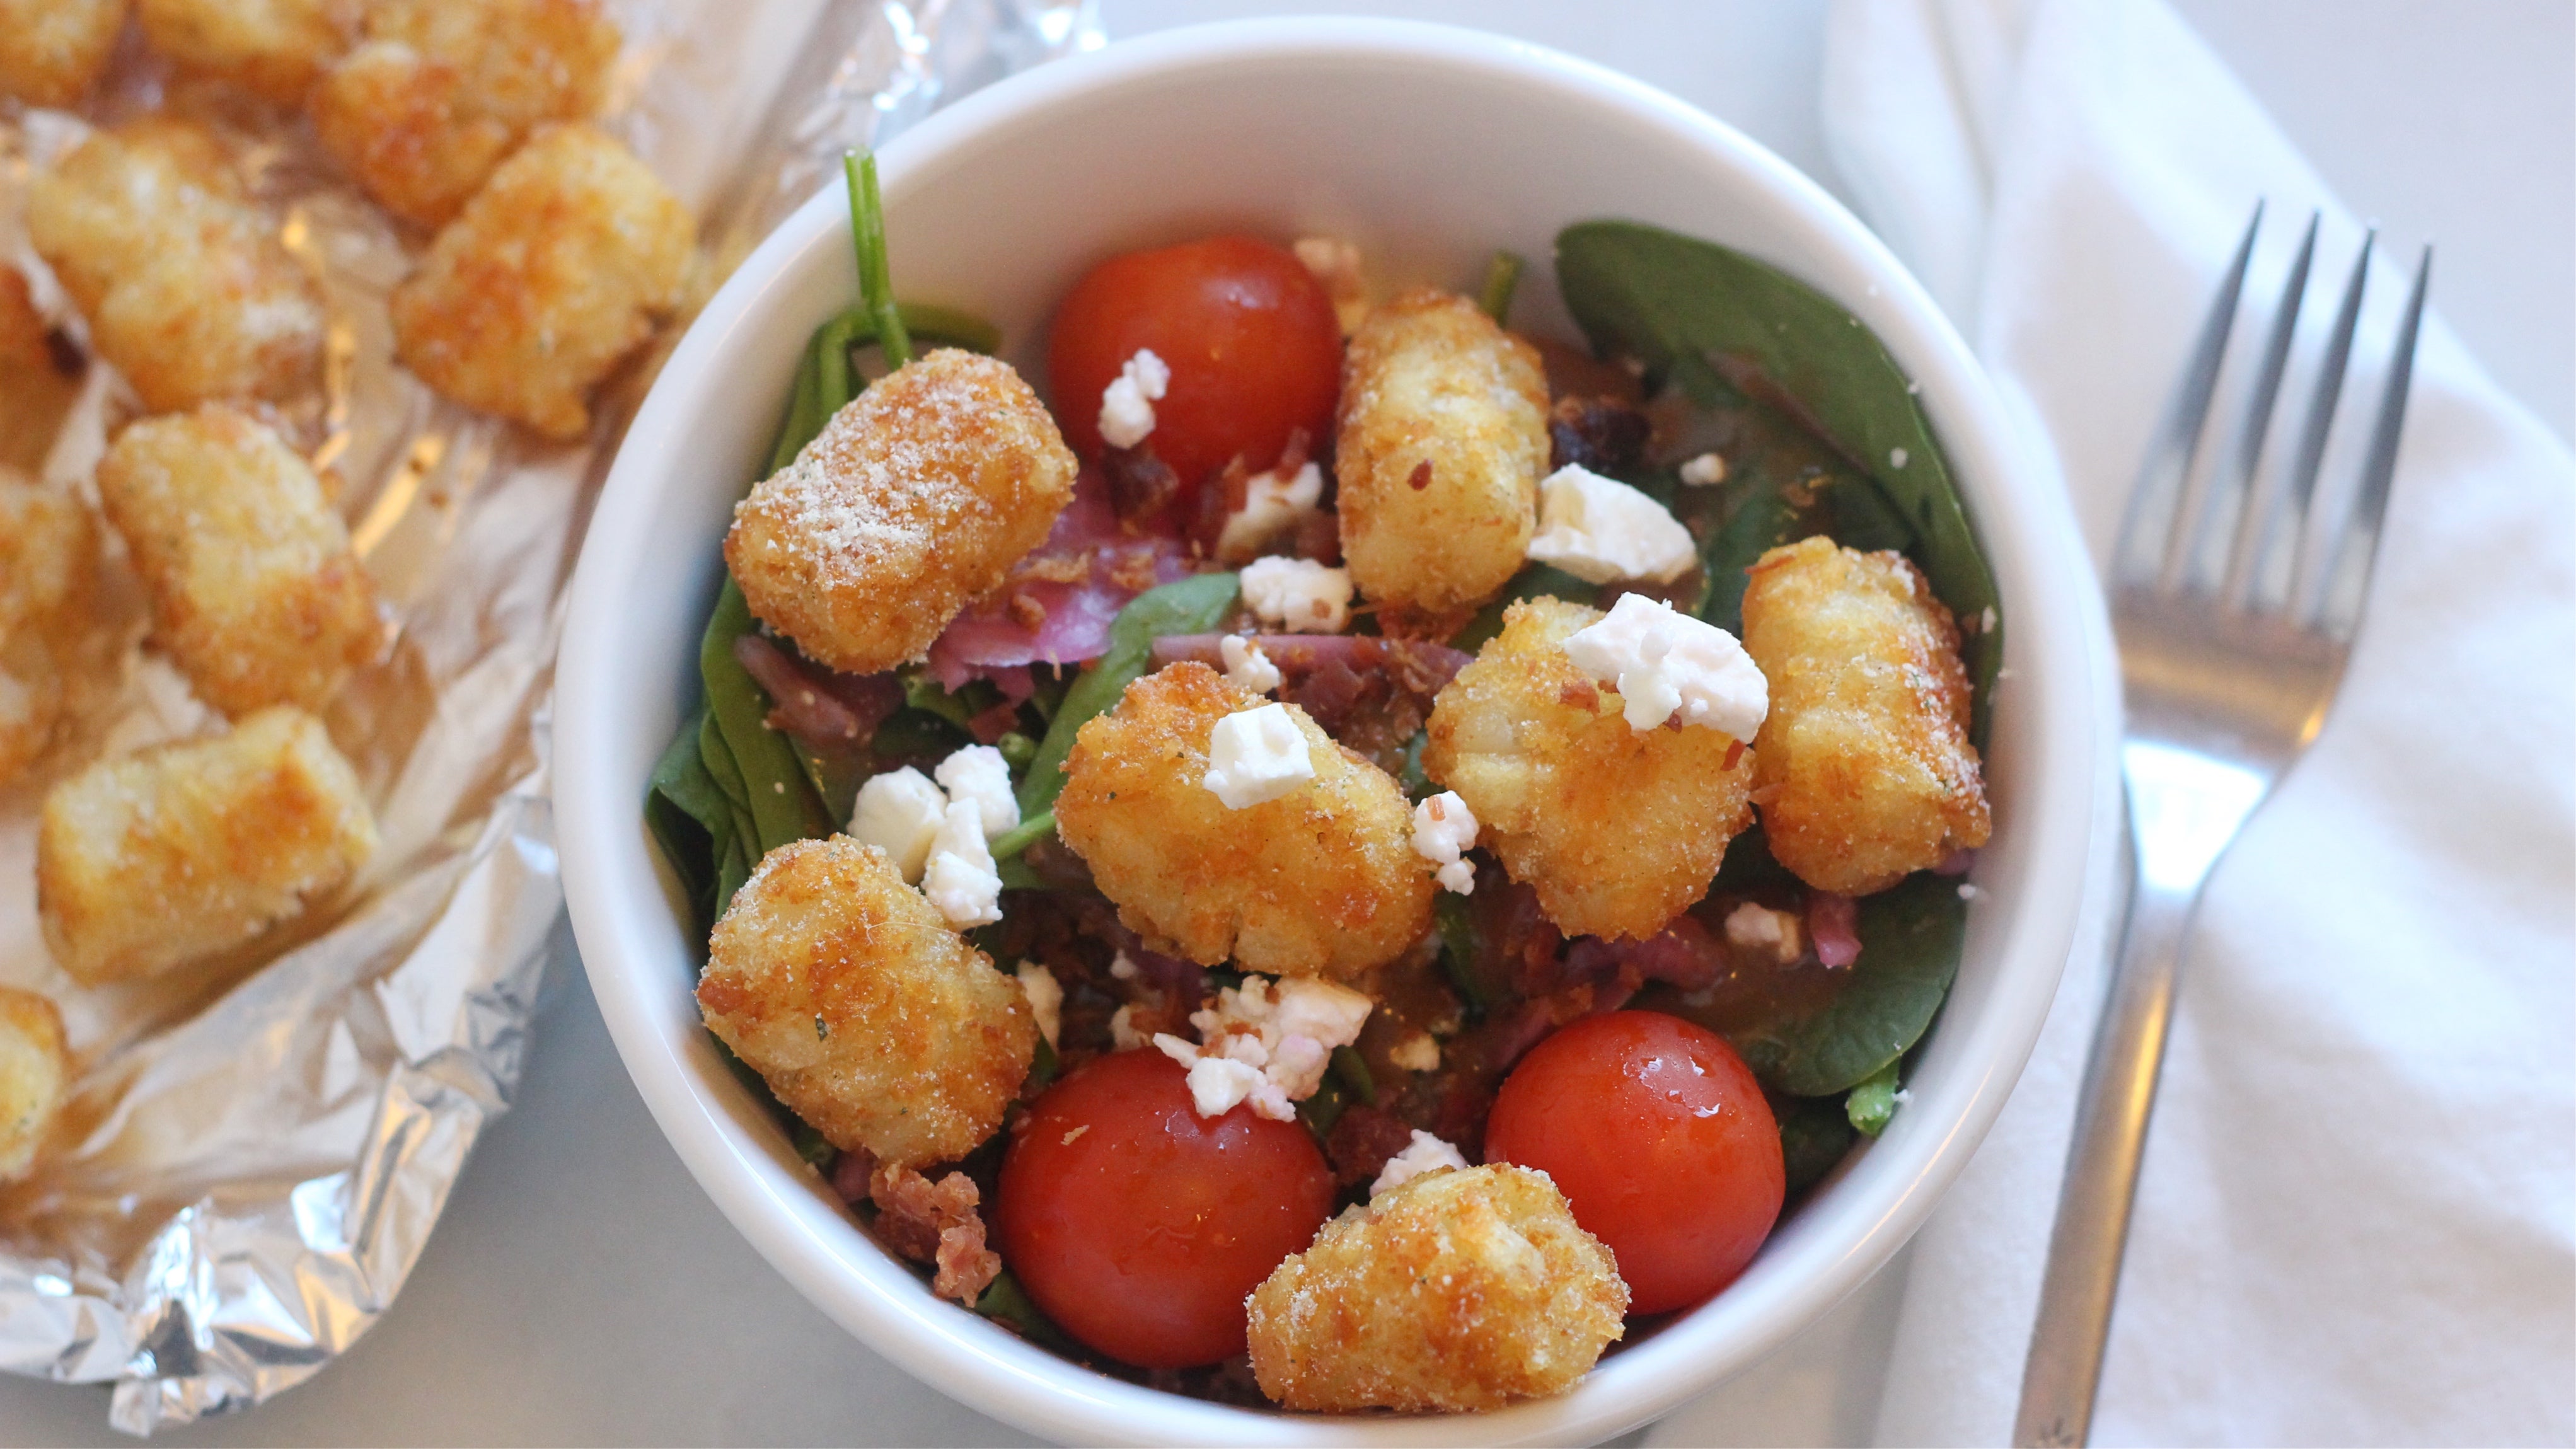 Potato Gems Are The New Croutons